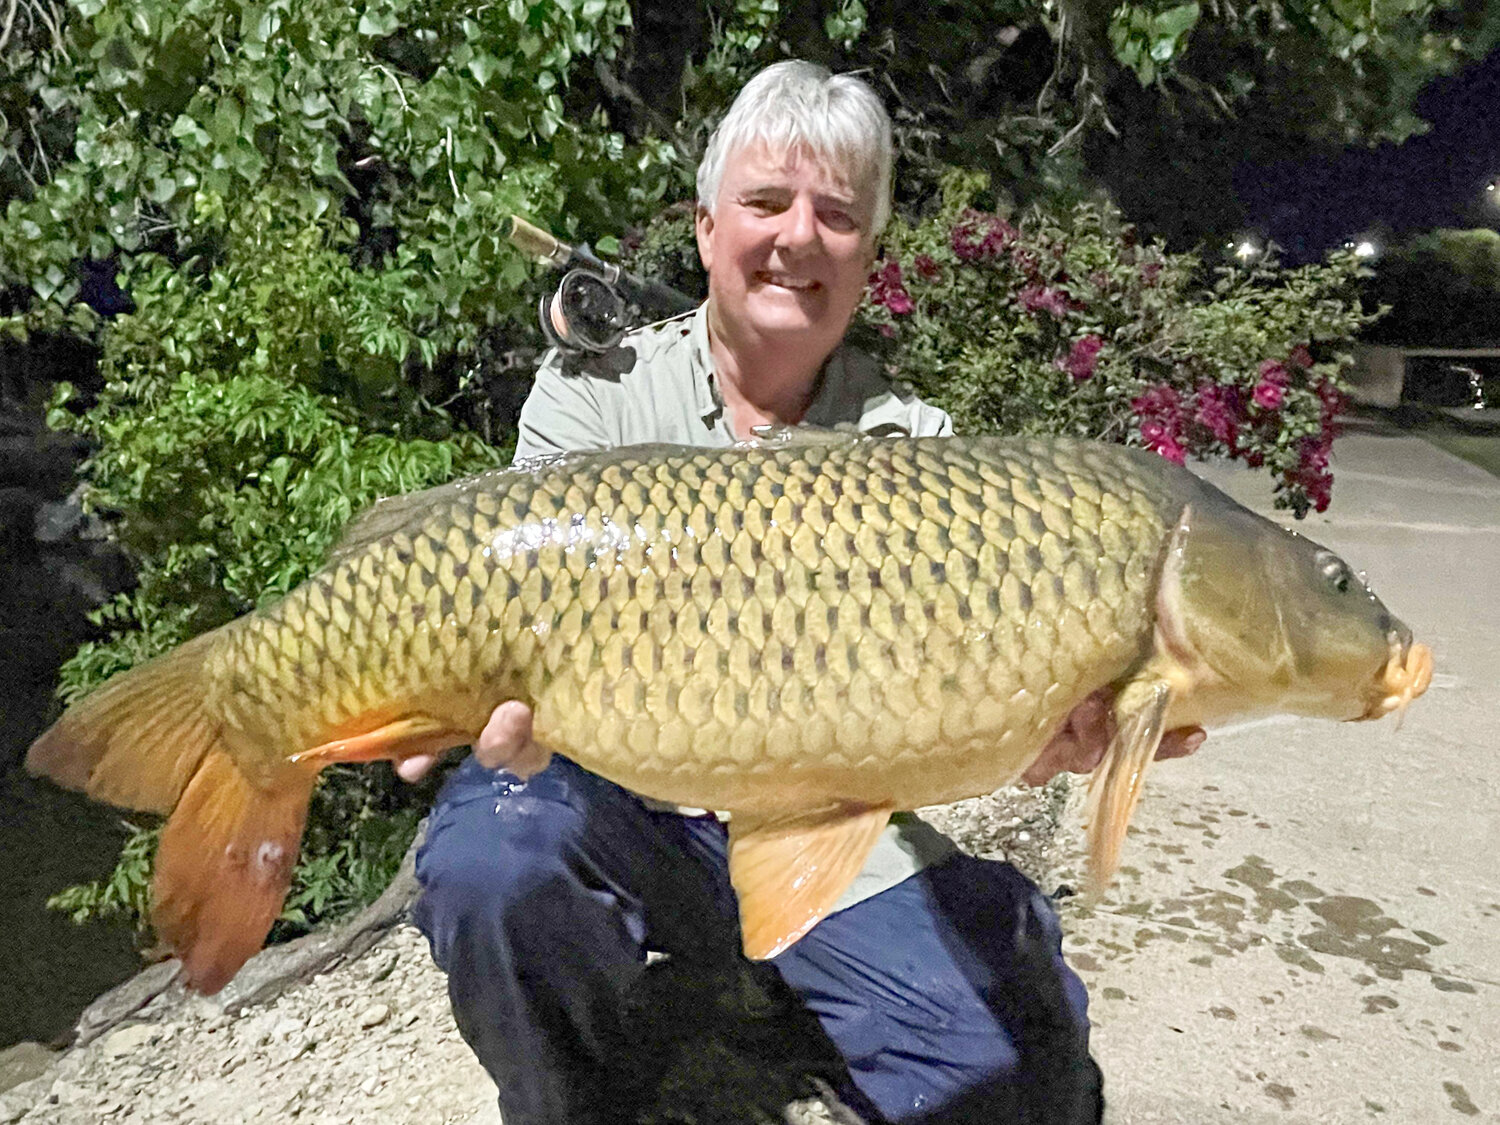 Barry Osborn holds his latest record fishing catch, a 26.1-pound, 35.25-inch common carp he caught in Lake Granbury.